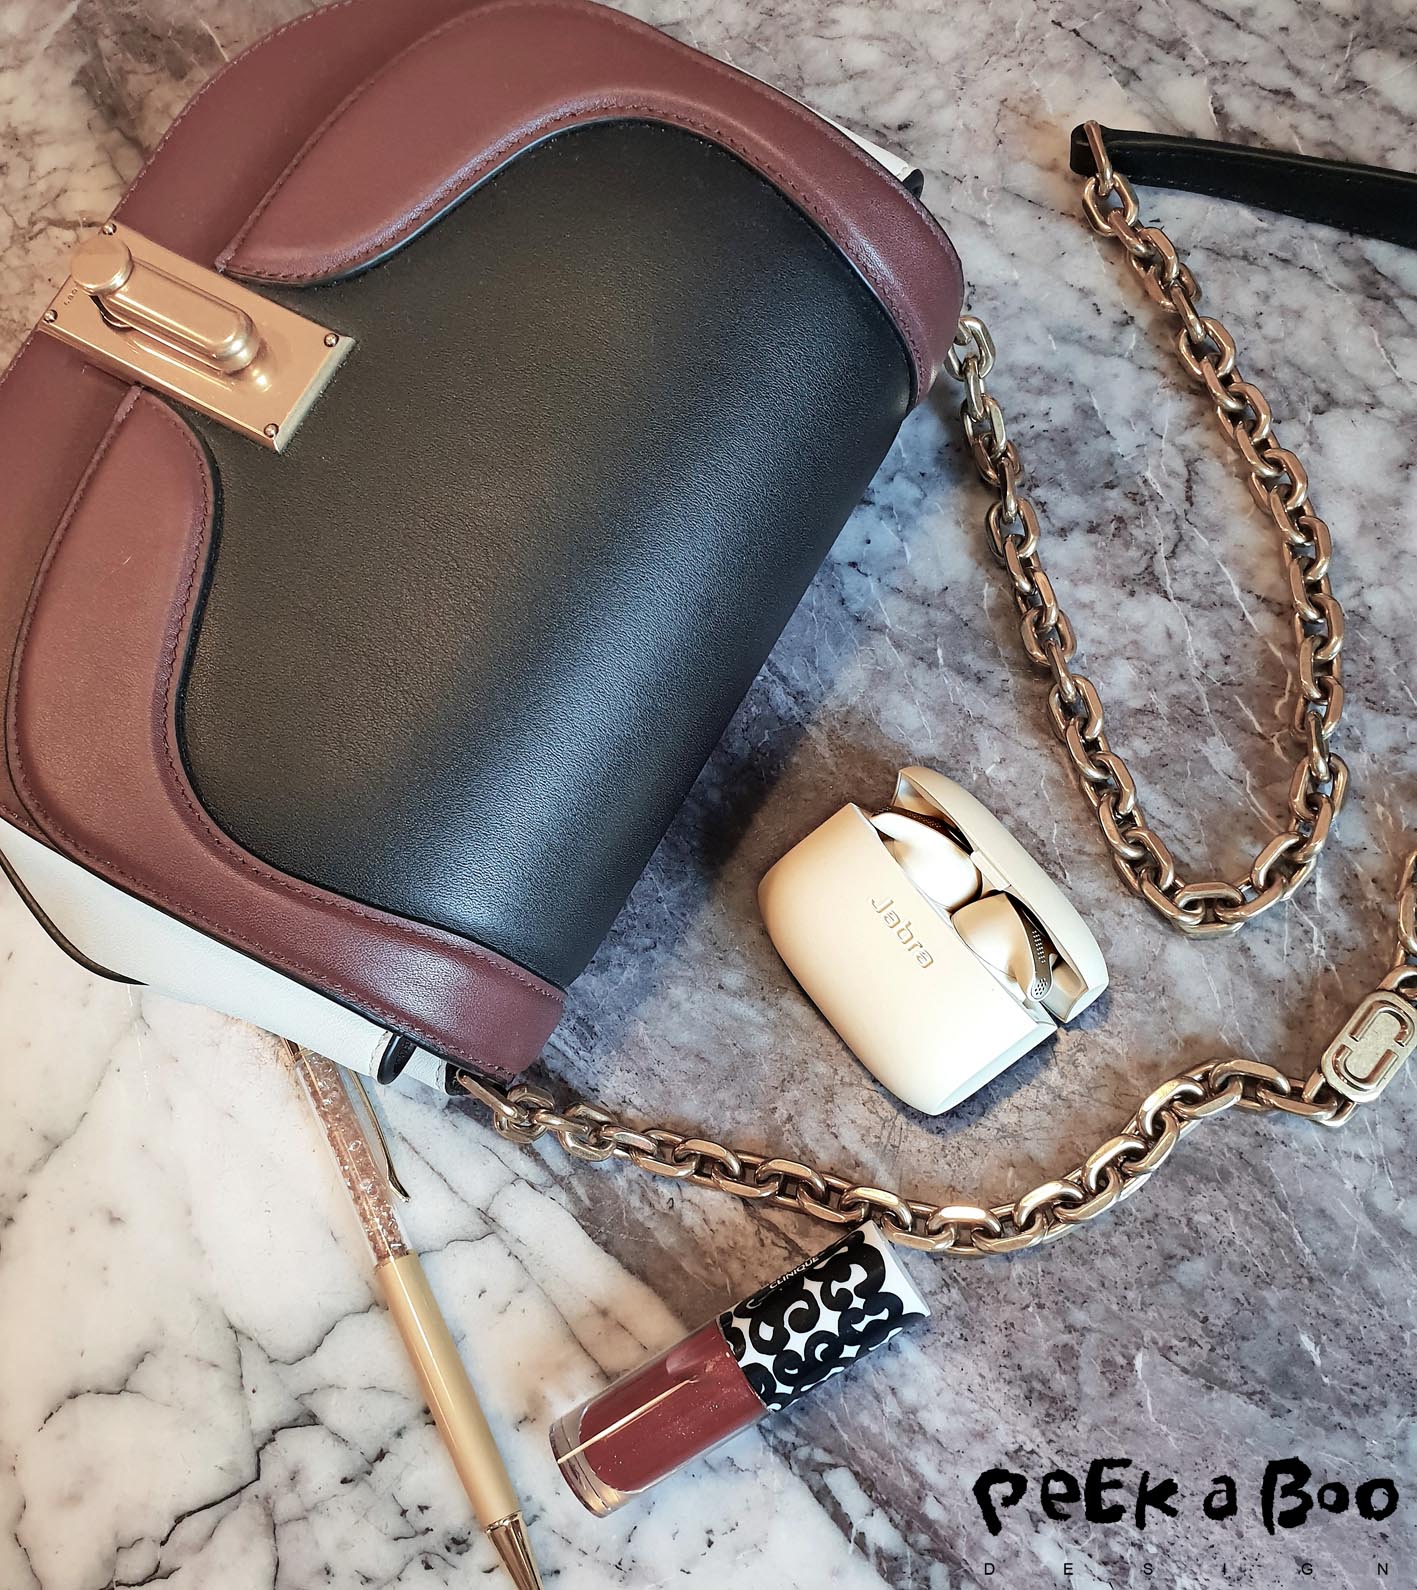 Jabra Elite 65t in the pretty rosegold colour, and it fits in any ladies bag. ;-)